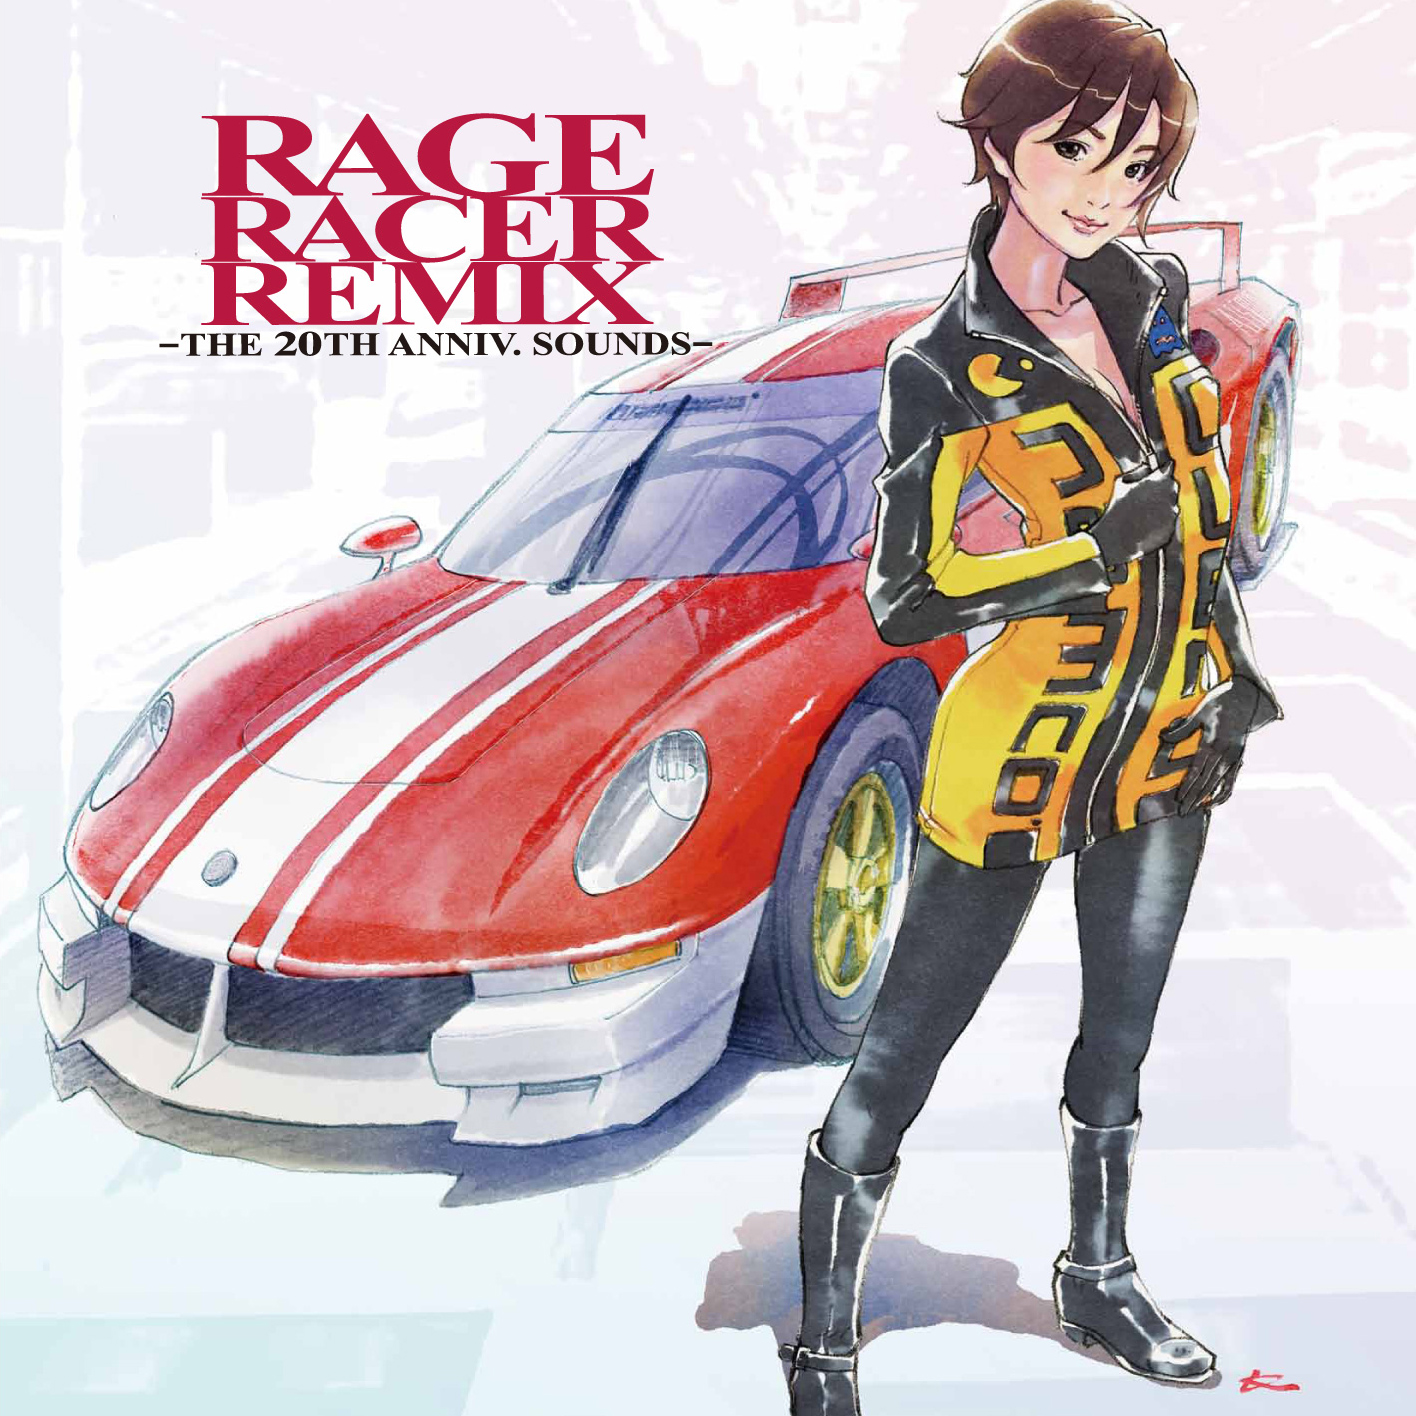 RAGE RACER REMIX -THE 20TH ANNIV. SOUNDS- + Extra Disc (2017) MP3 